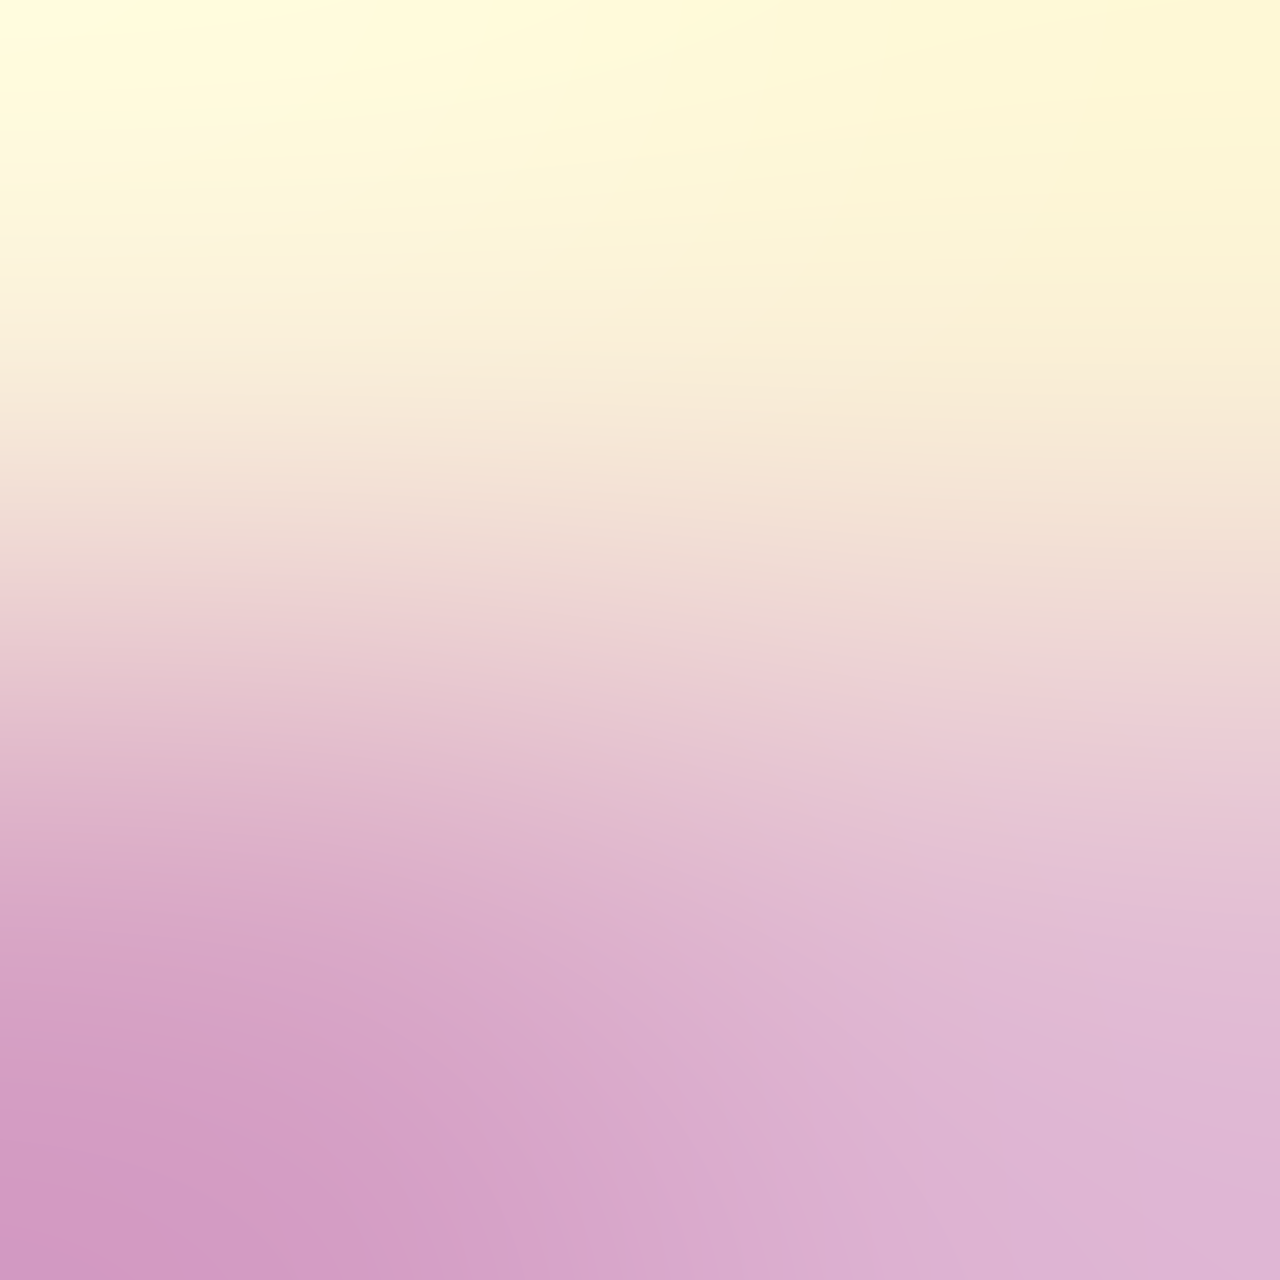 Colorful Gradient - Solid Color Background - 1280x1280 Wallpaper 